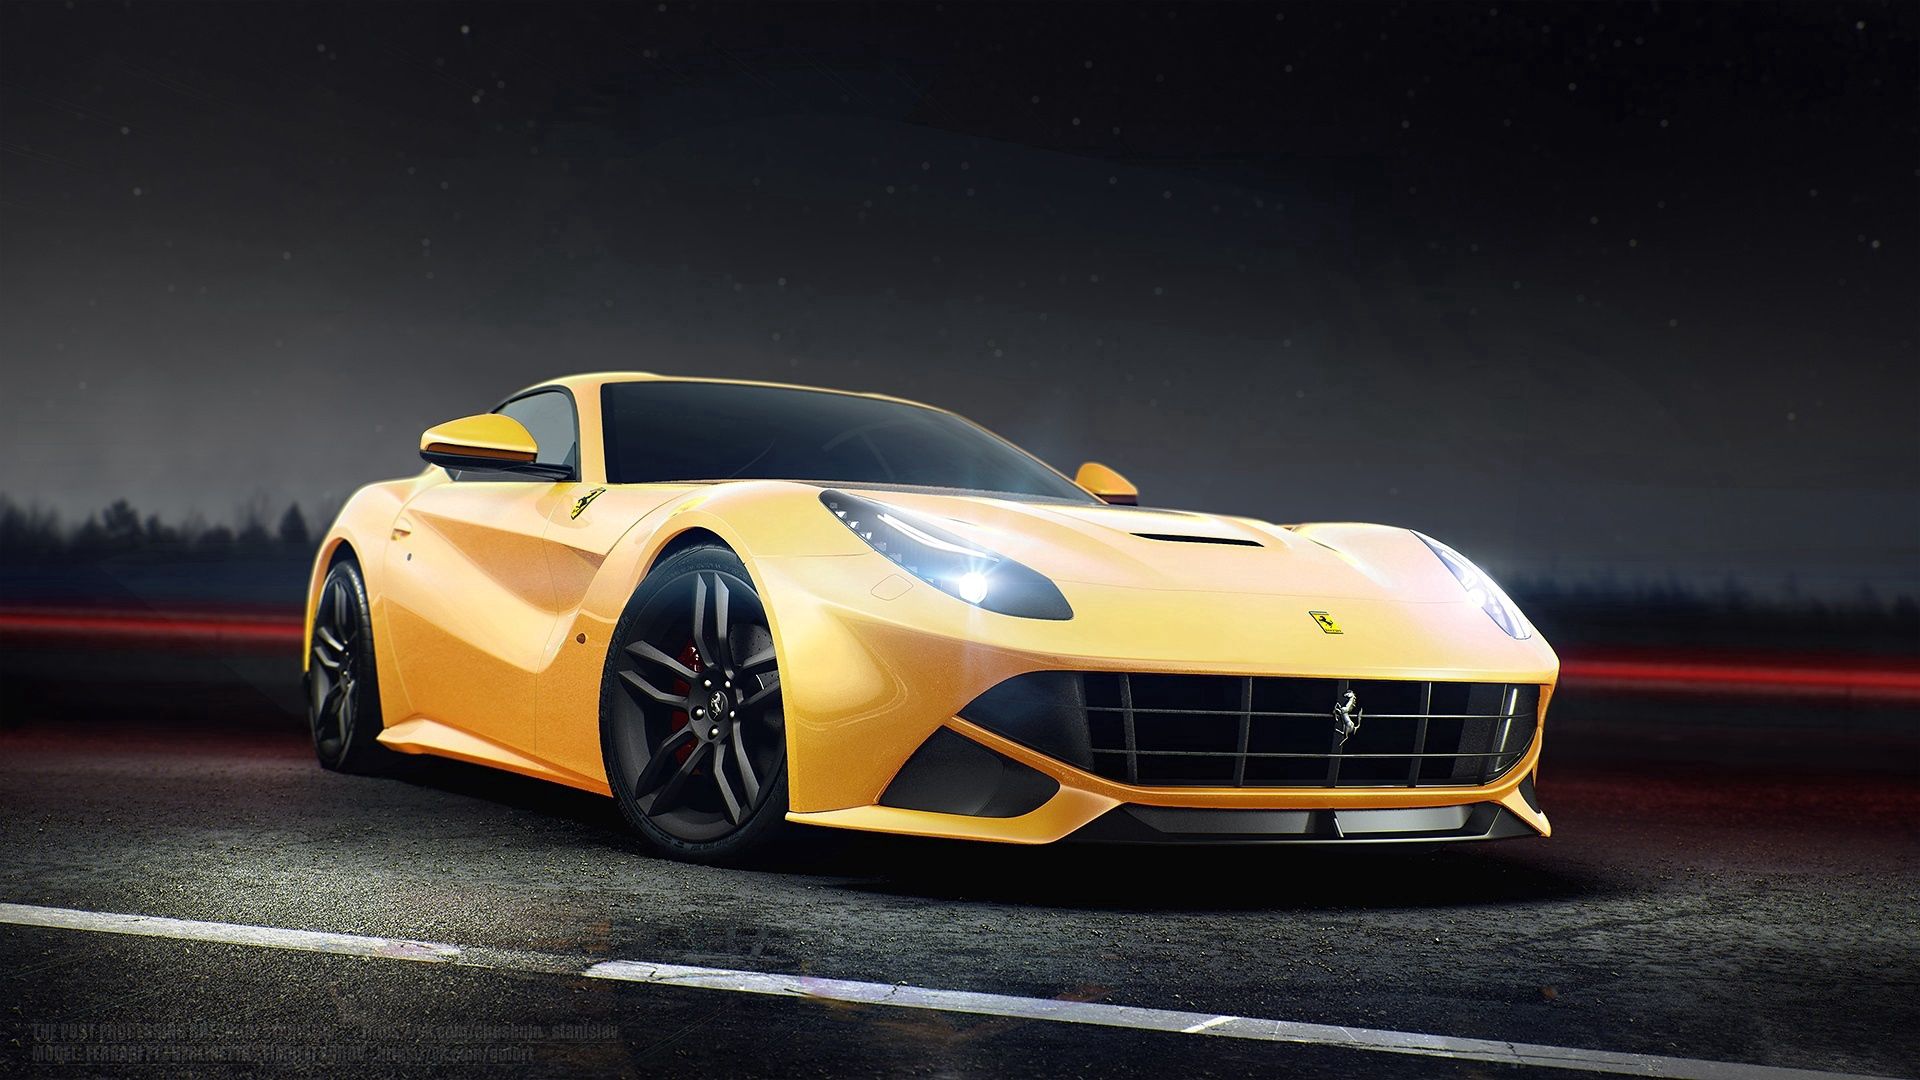 yellow, f12, side view, cars Ferrari Tablet Wallpapers